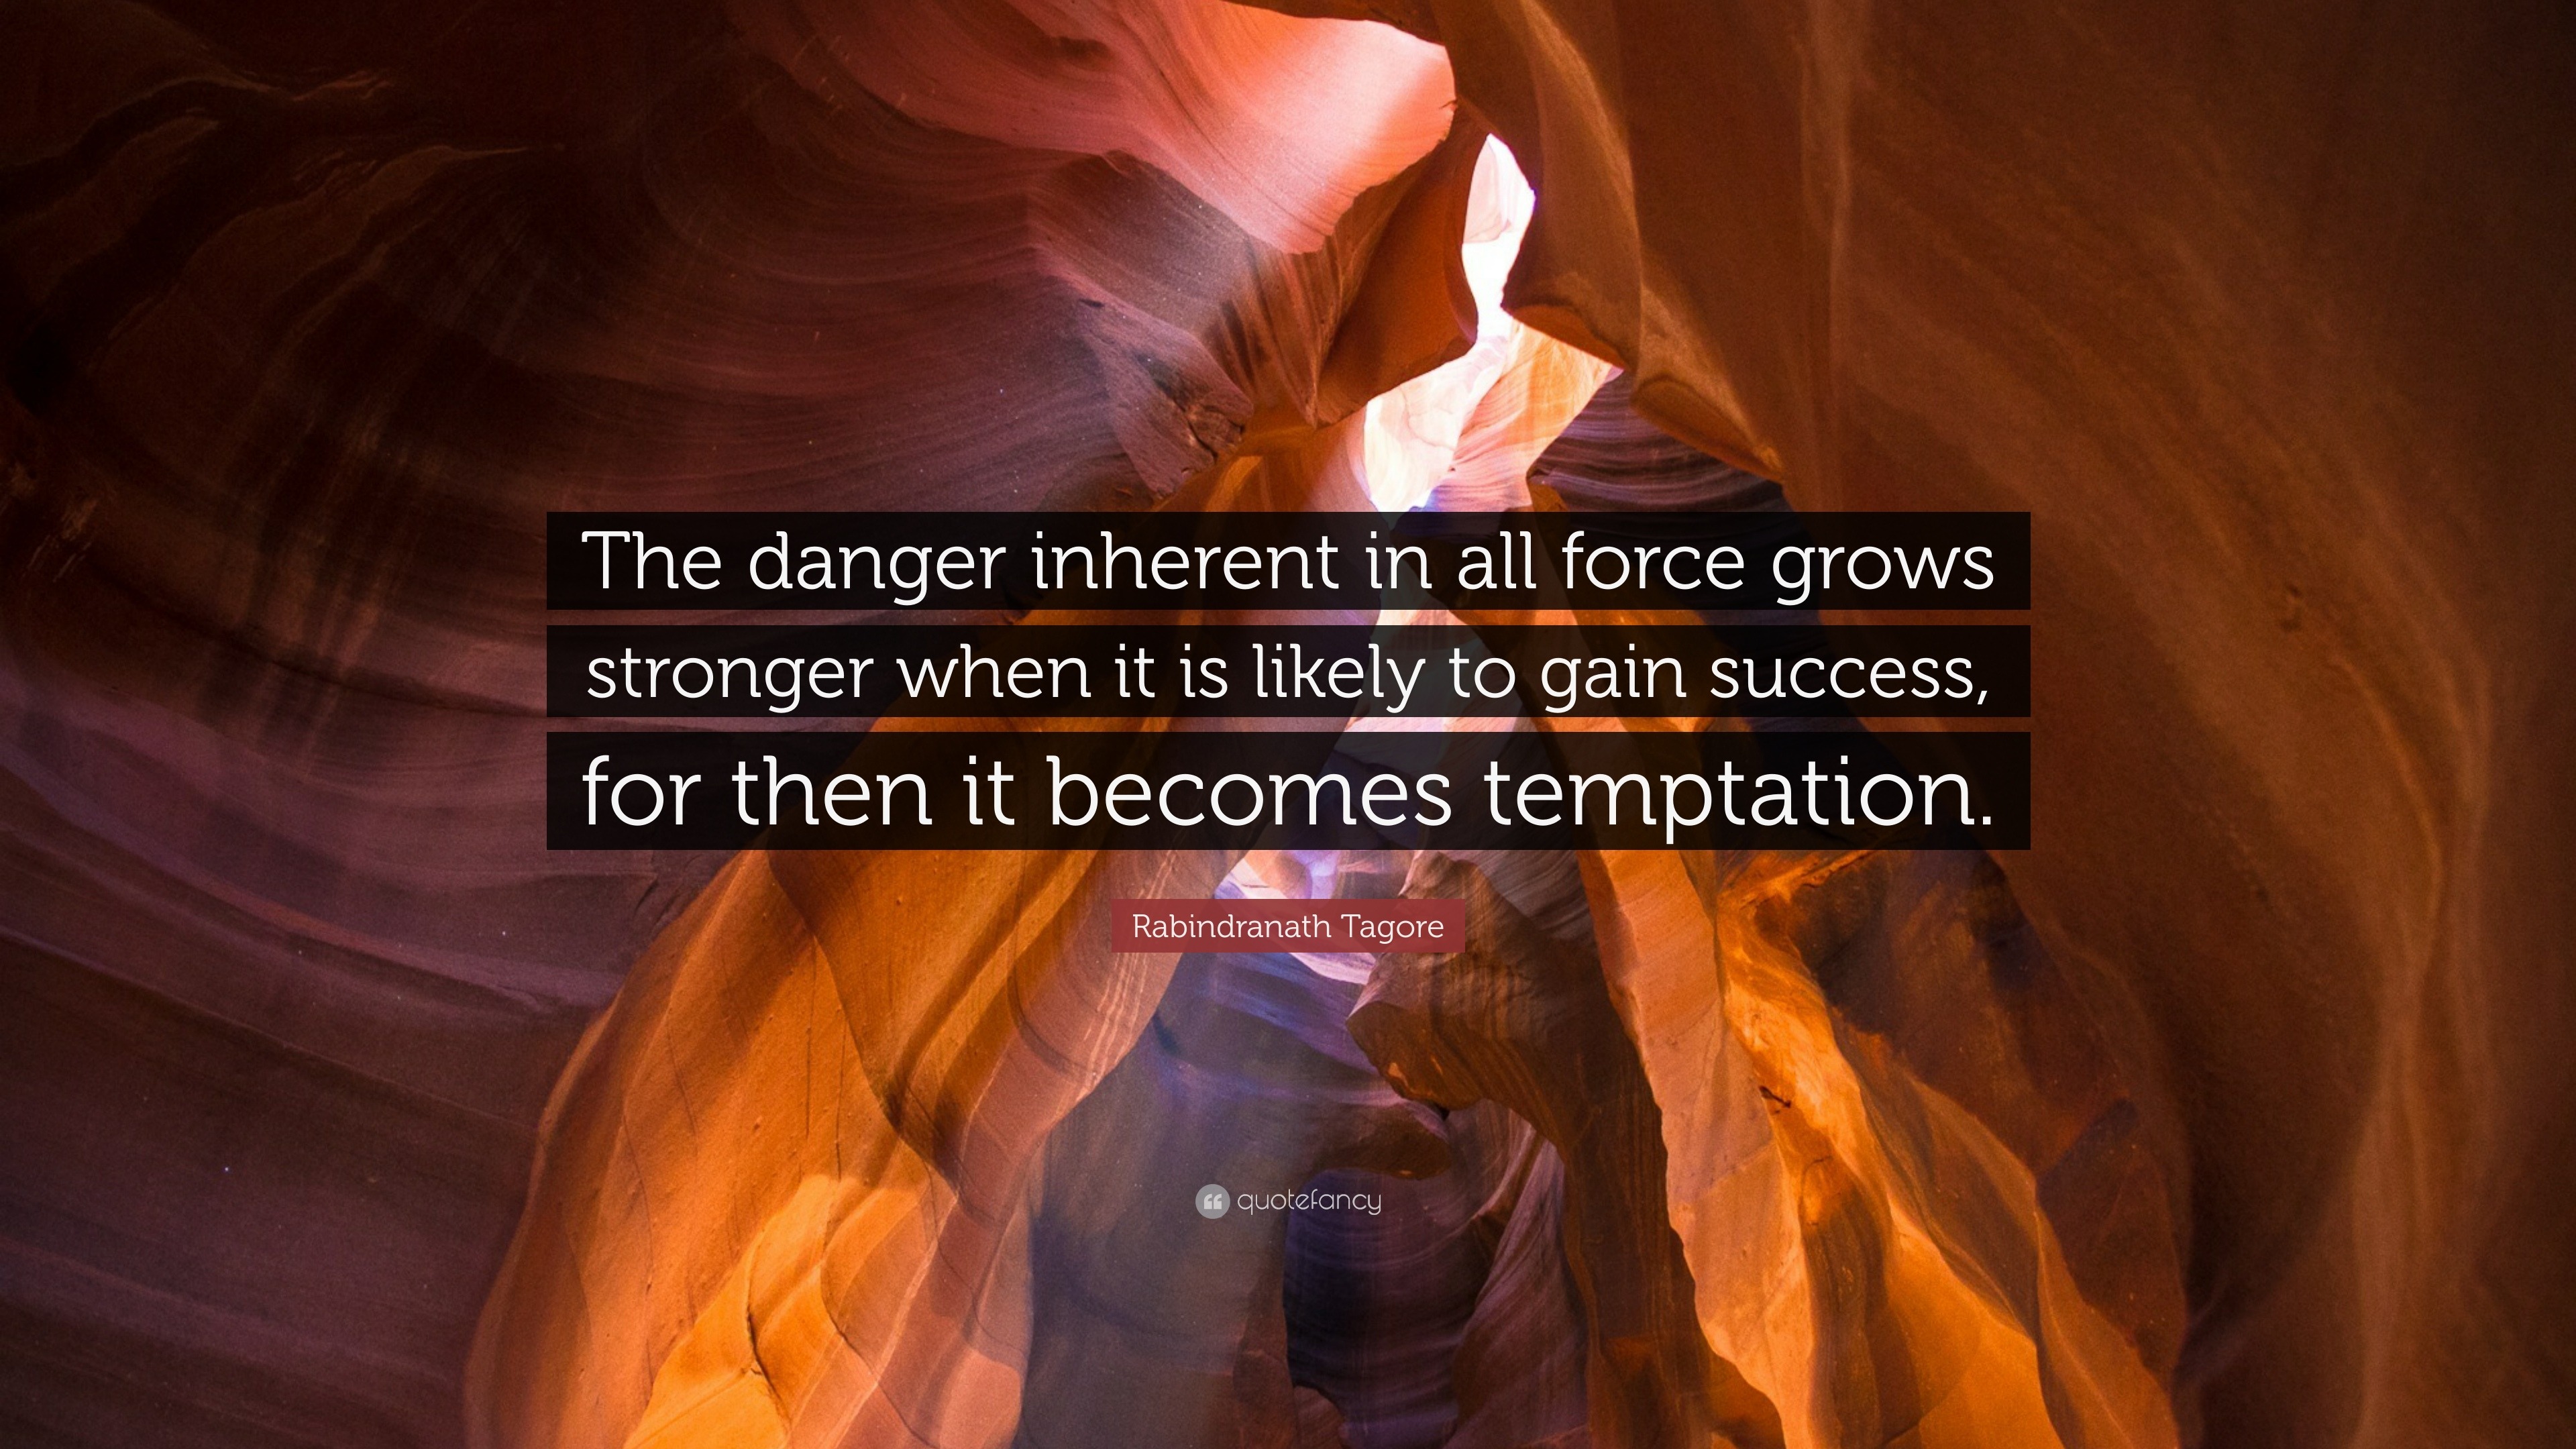 rabindranath tagore quote: "the danger inherent in all force